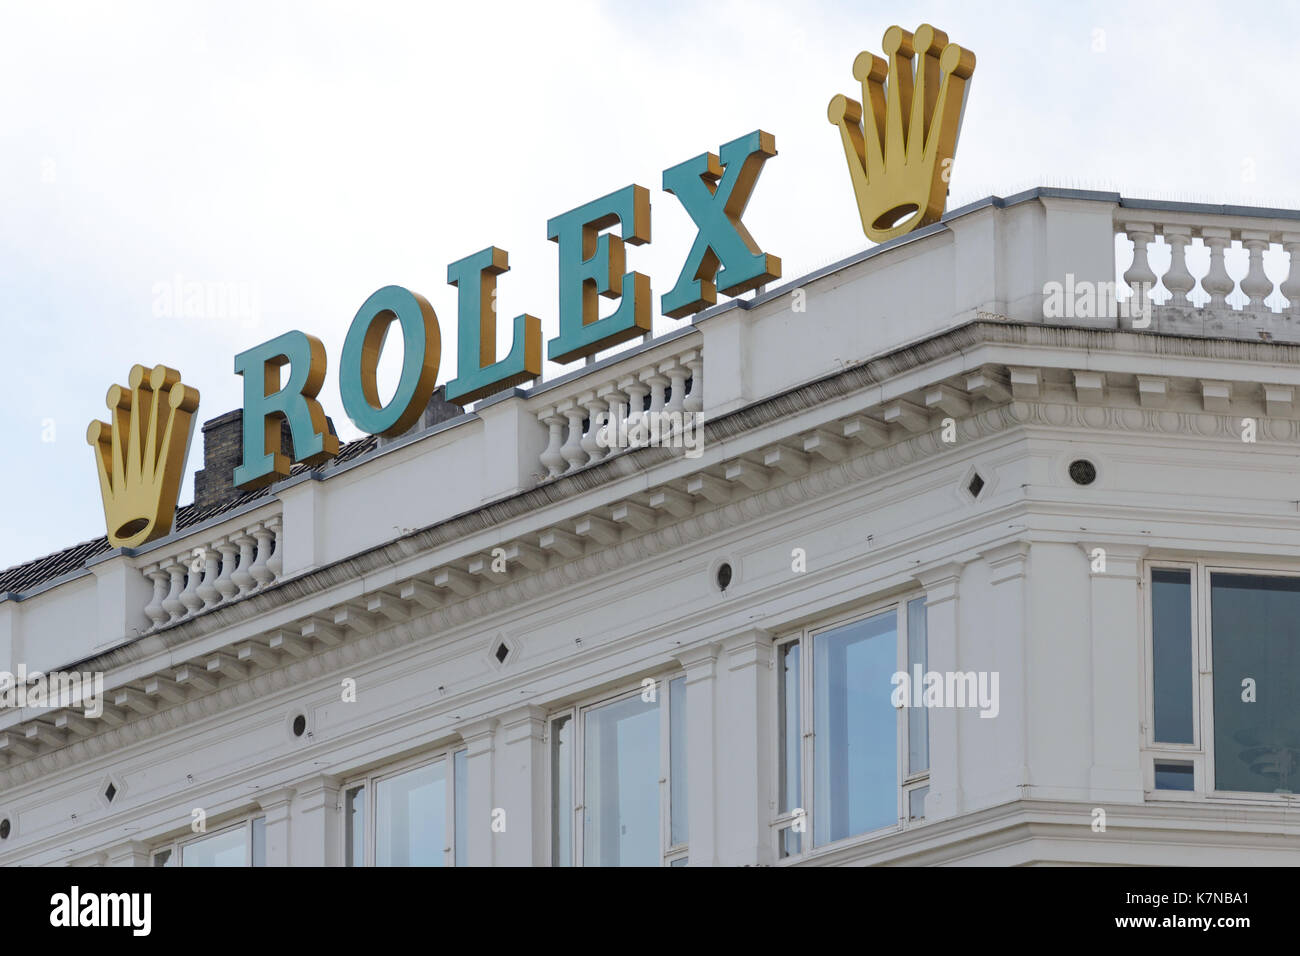 Copenhagen, Denmark - July 24, 2017: Rolex Company sign on the top of the building in Copenhagen. Rolex is a famous Swiss manufacturer of high-quality Stock Photo